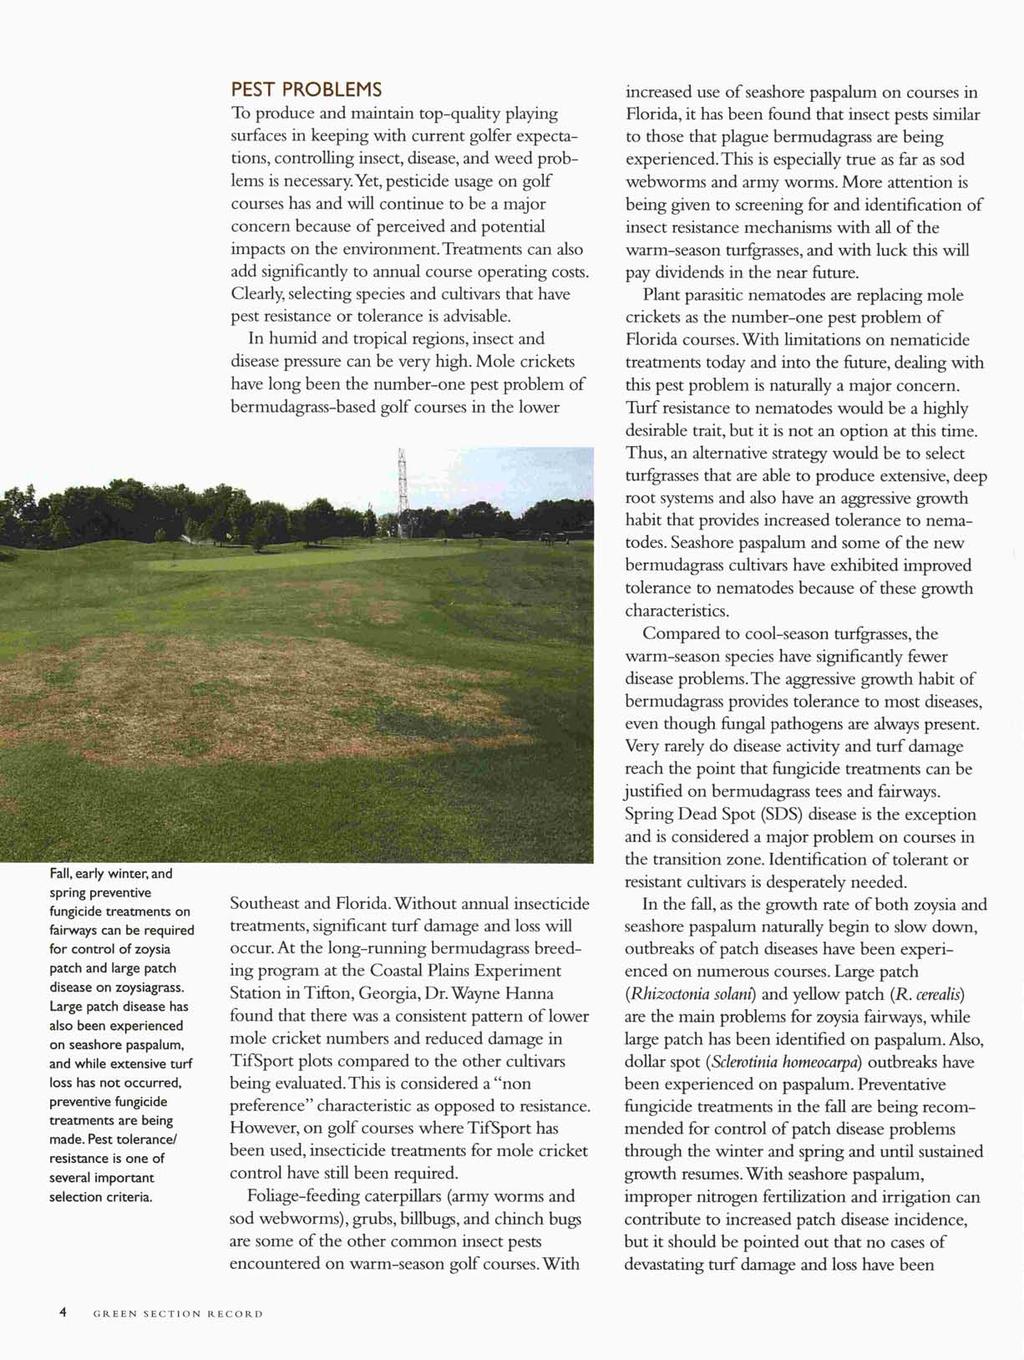 Fall,early winter, and spring preventive fungicide treatments on fairways can be required for control of zoysia patch and large patch disease on zoysiagrass.